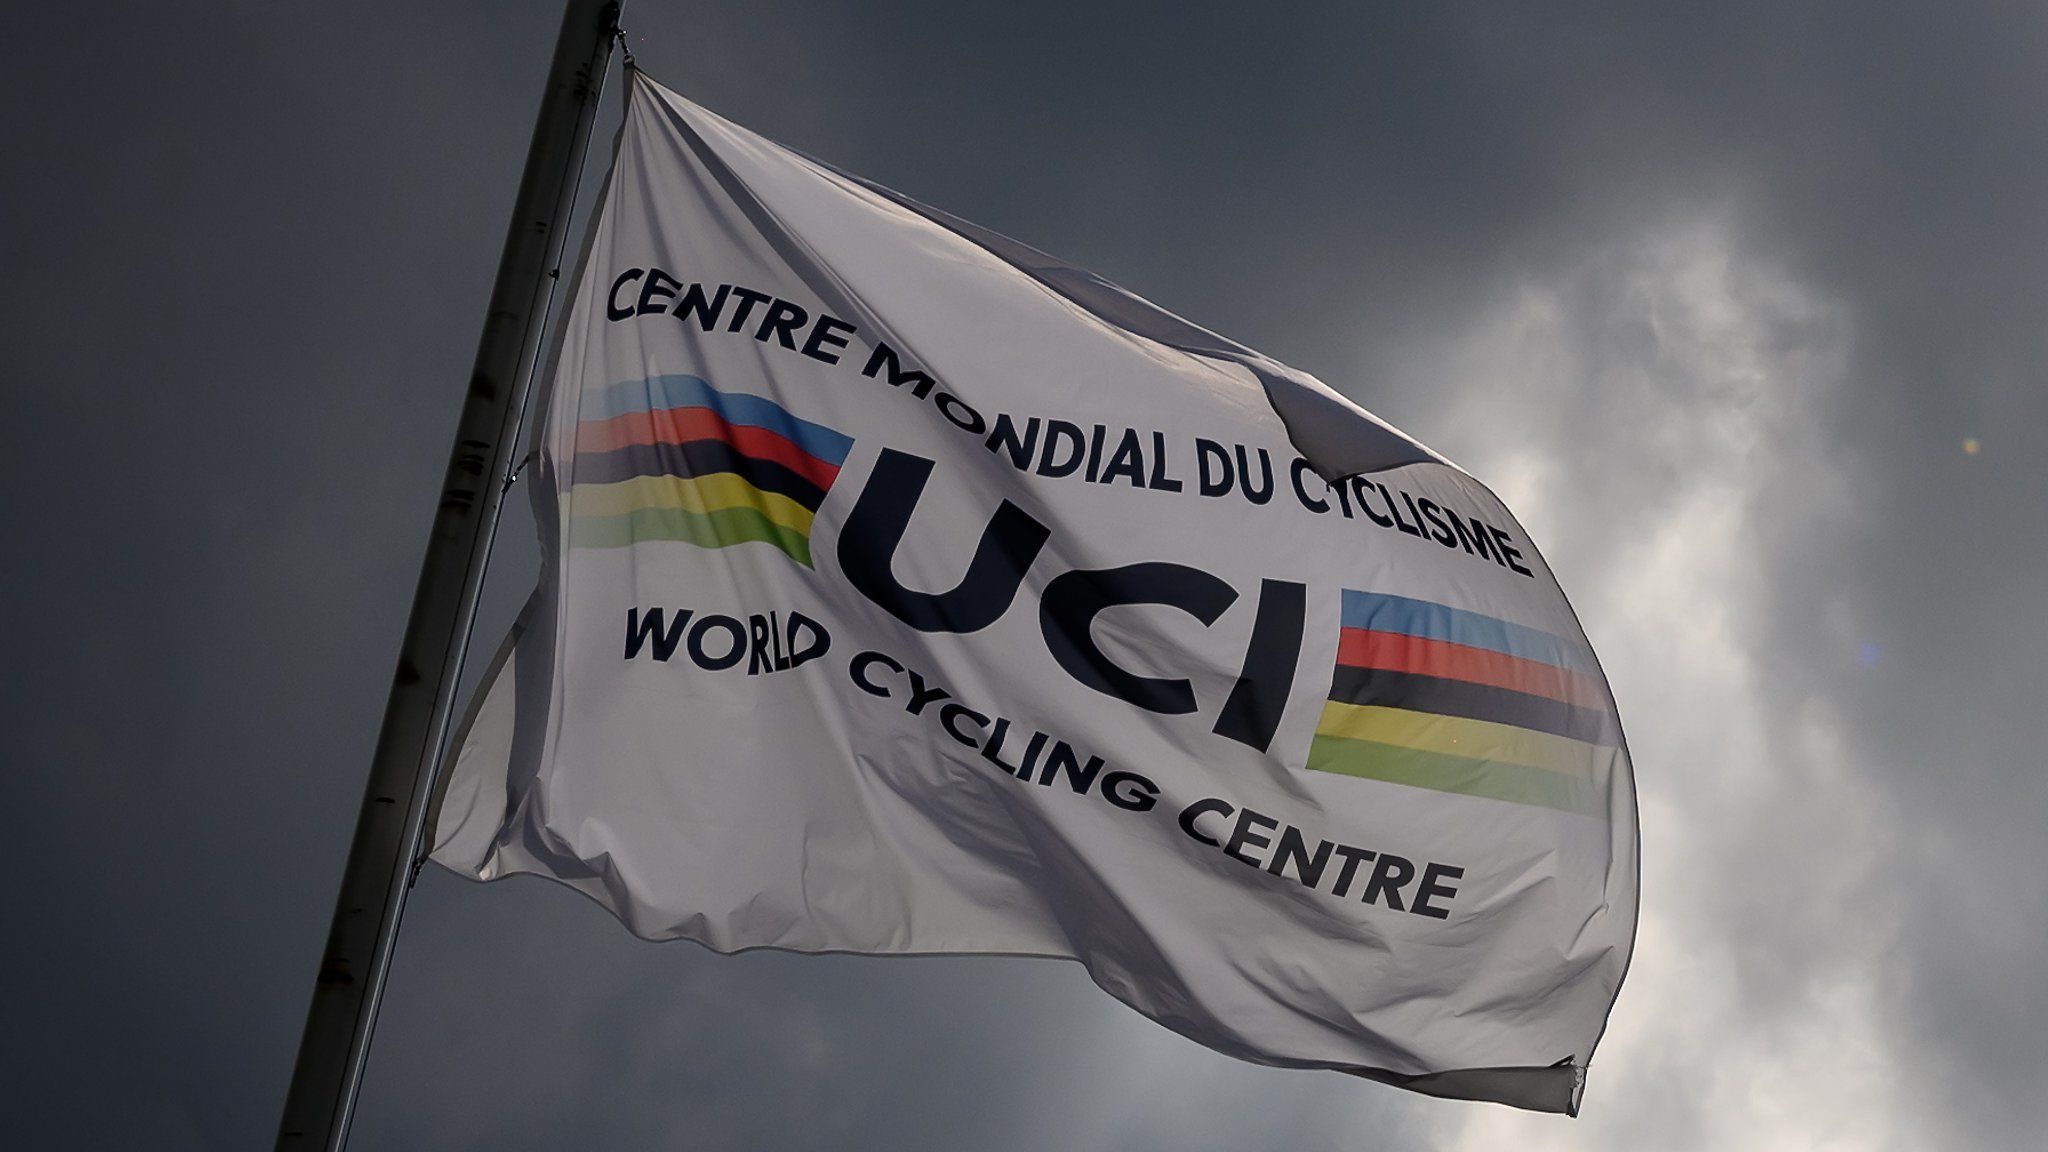 The UCI is cycling's world ruling body